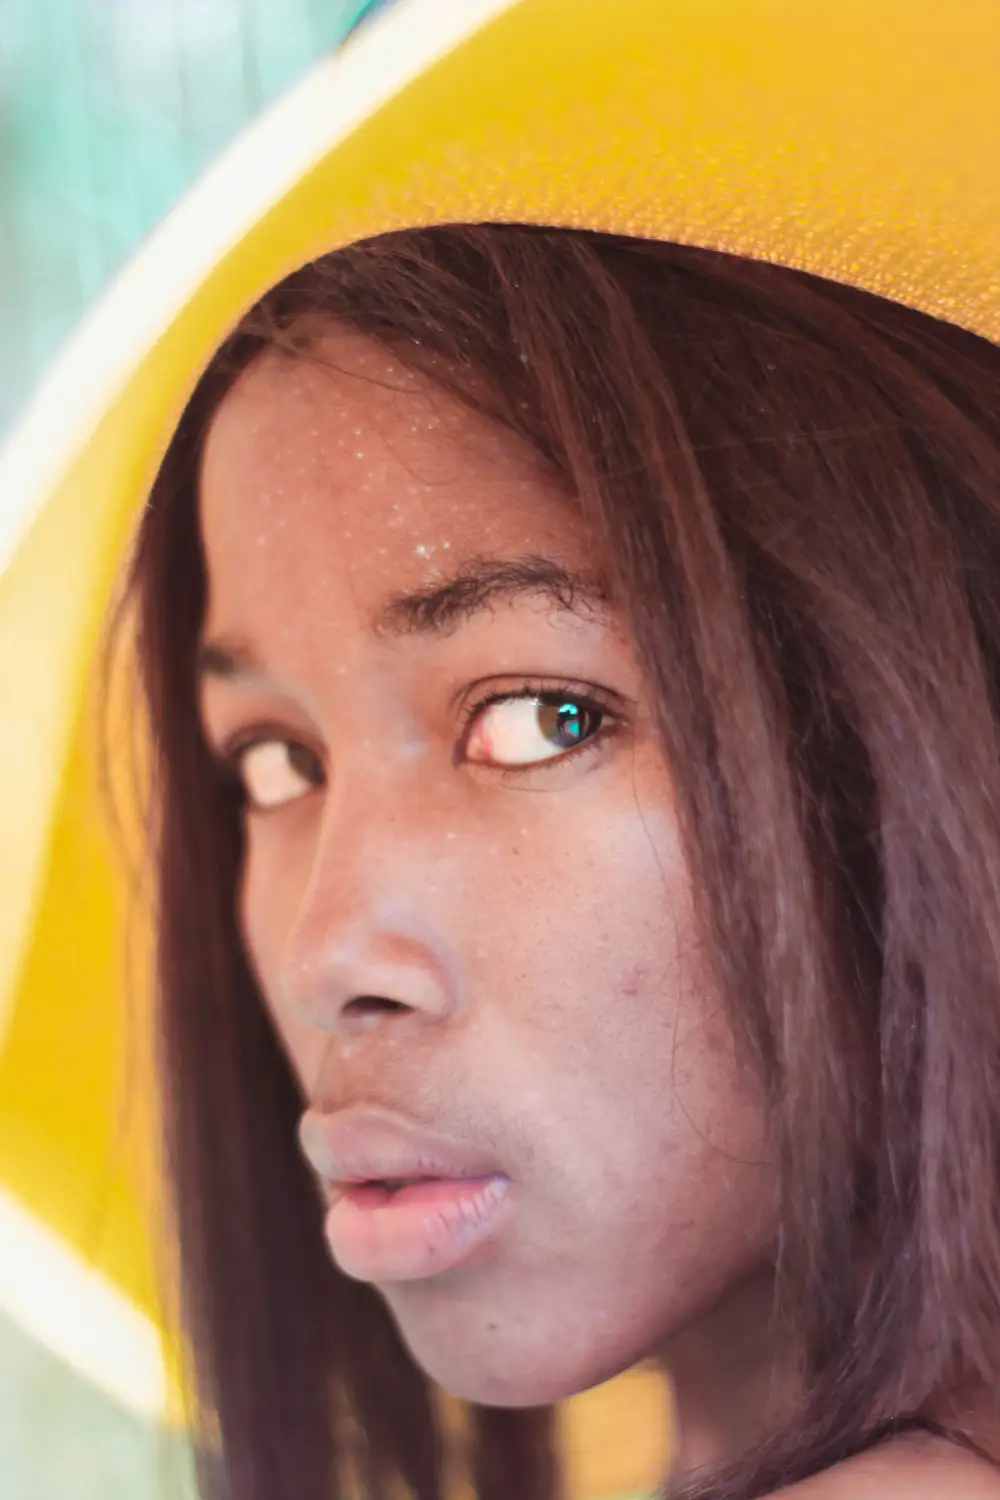 Close-up of girl adorning a yellow sun hat staring into the camera